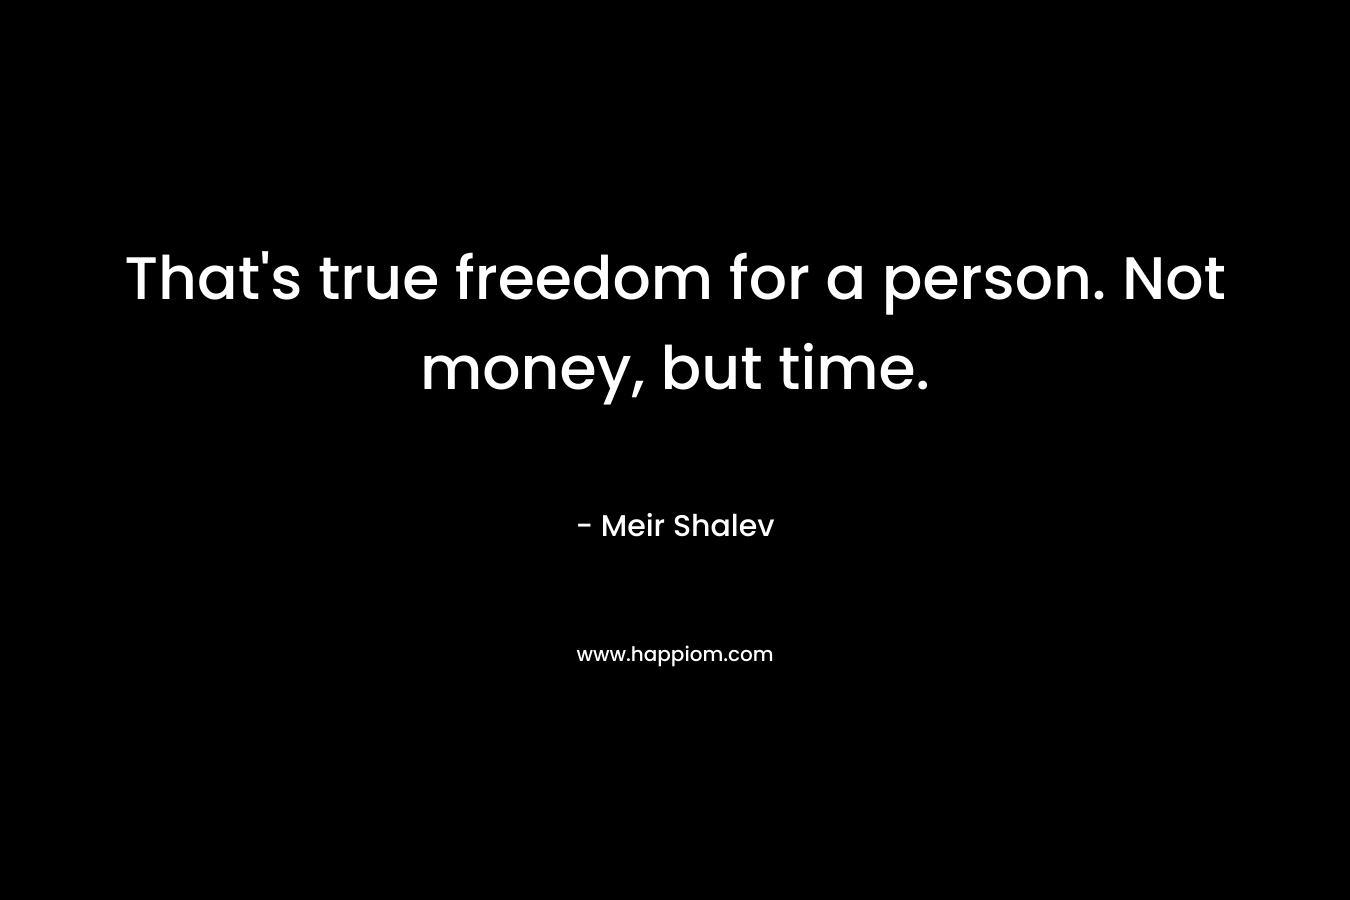 That’s true freedom for a person. Not money, but time. – Meir Shalev